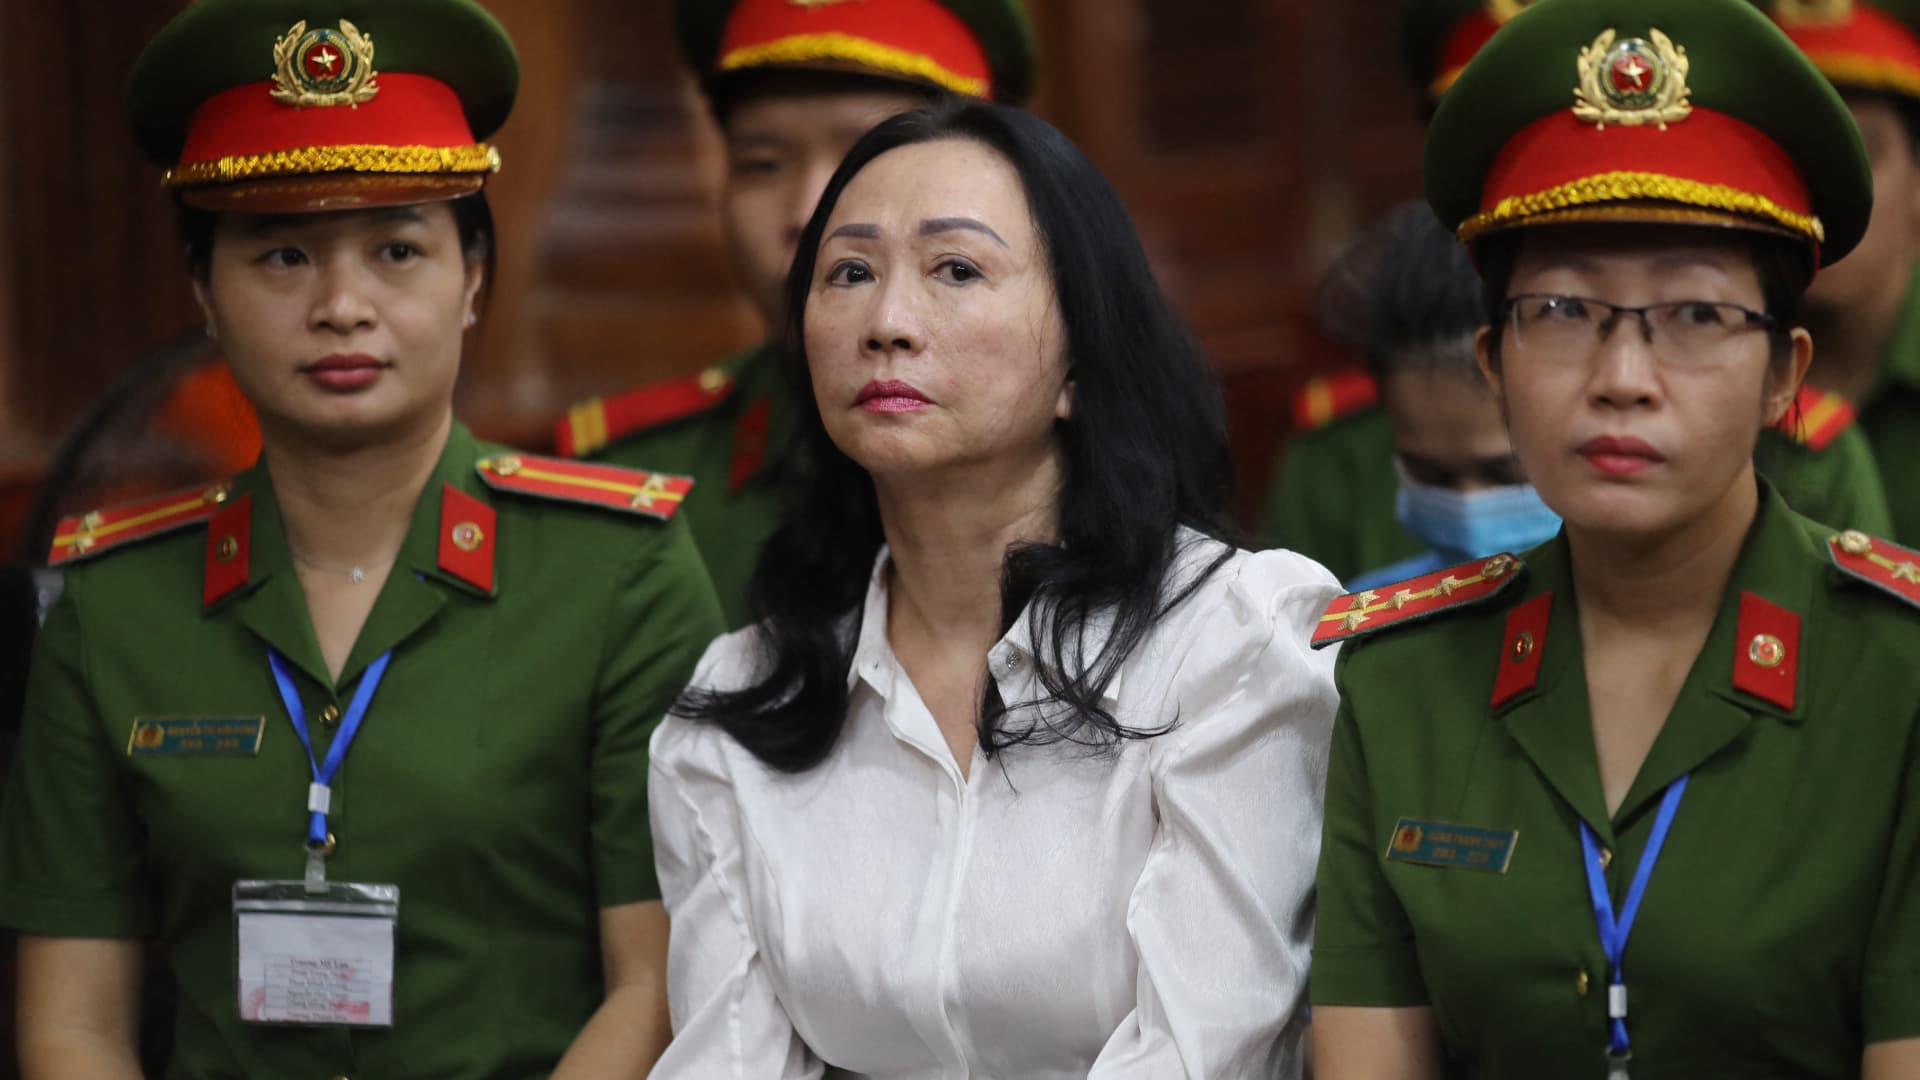 Vietnamese property tycoon sentenced to death in country’s largest financial fraud, state media reports